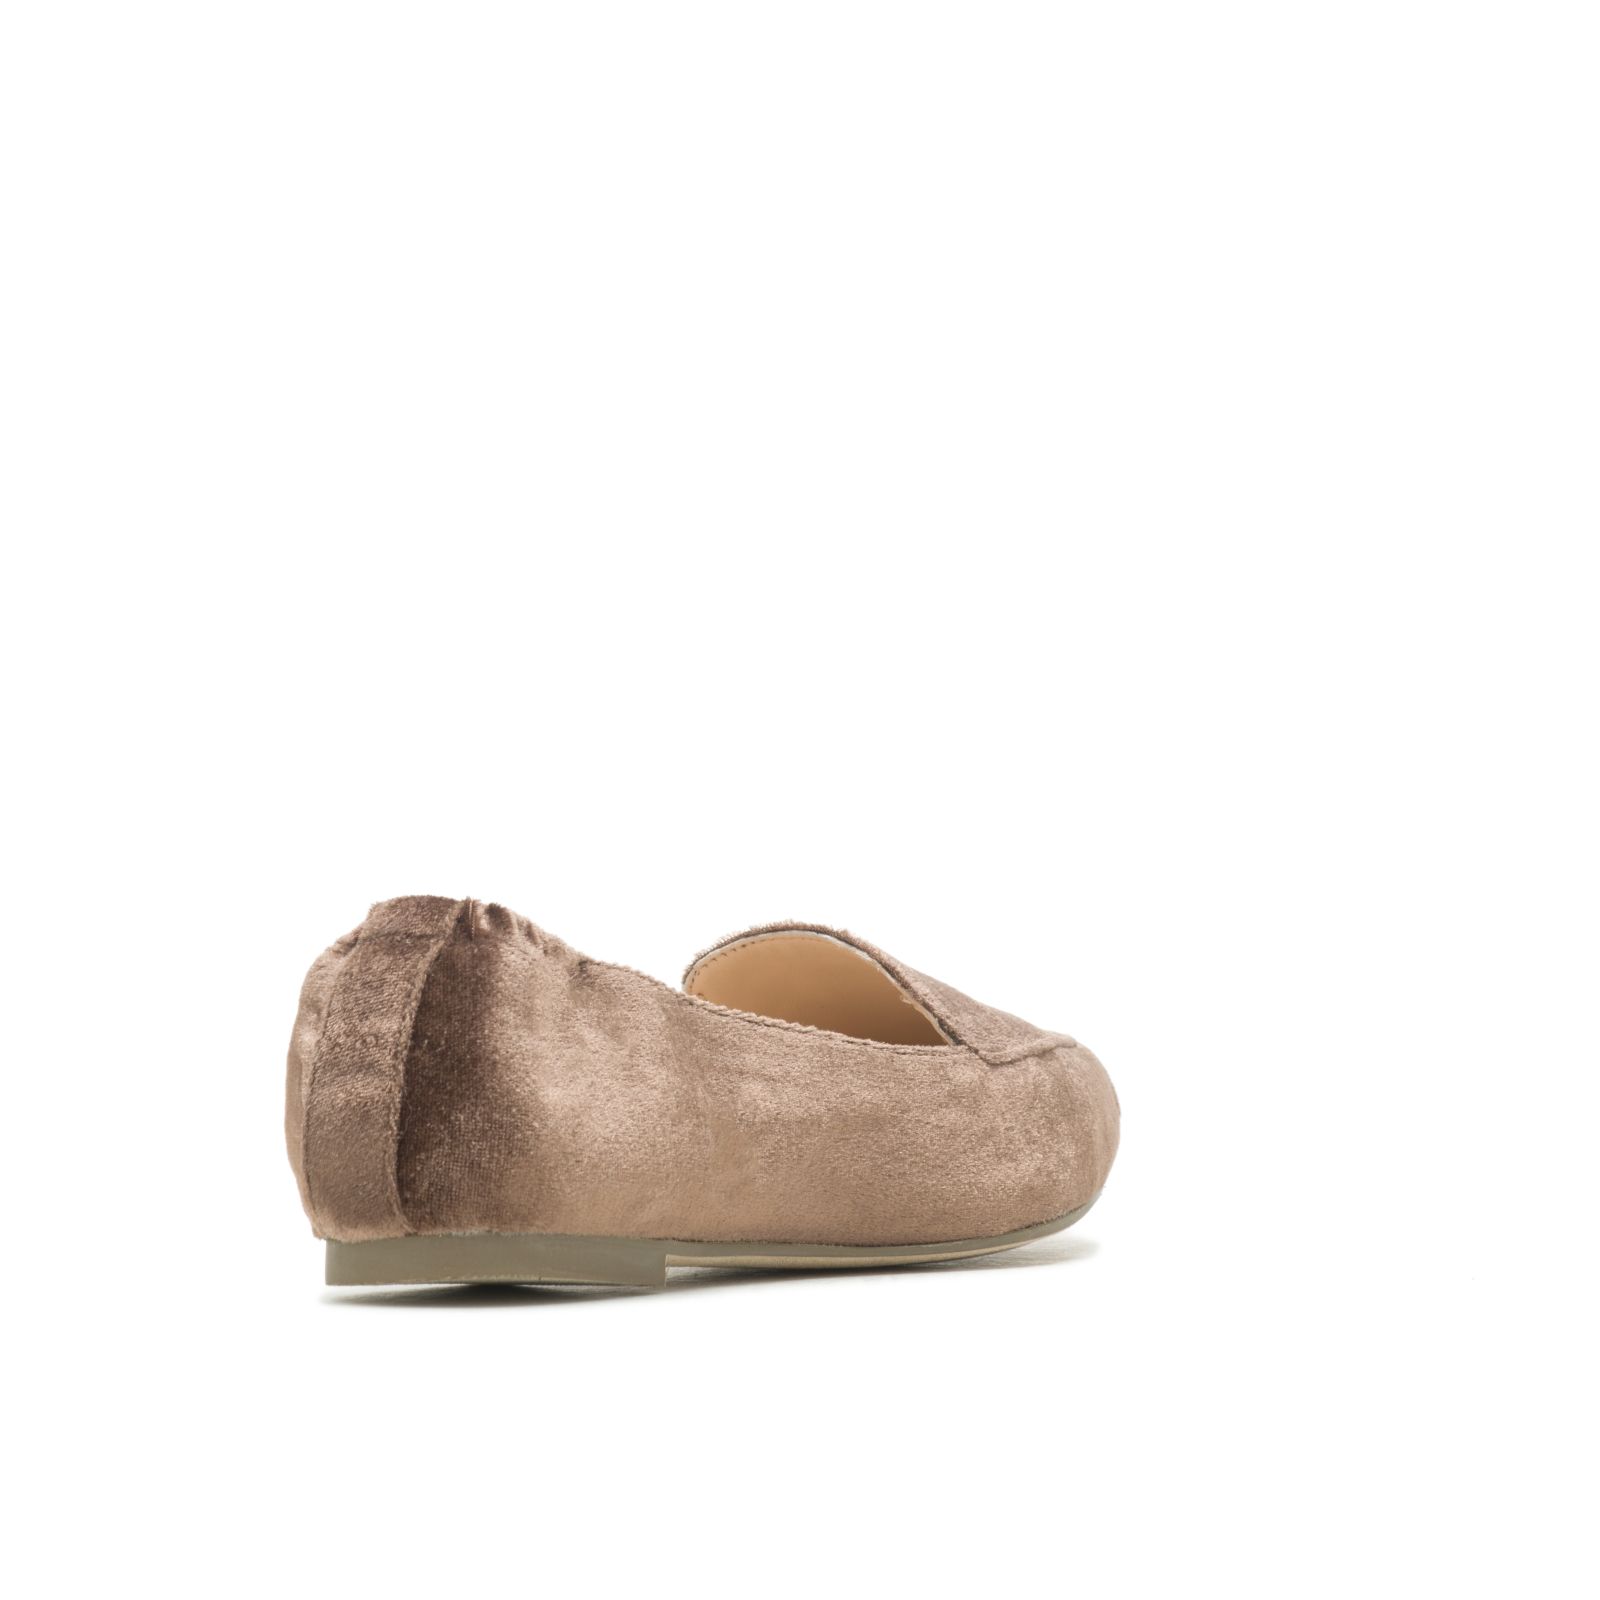 Loafers Hush Puppies Hazel Pointe Mujer Marrom Oscuro | DQBSNOT-40